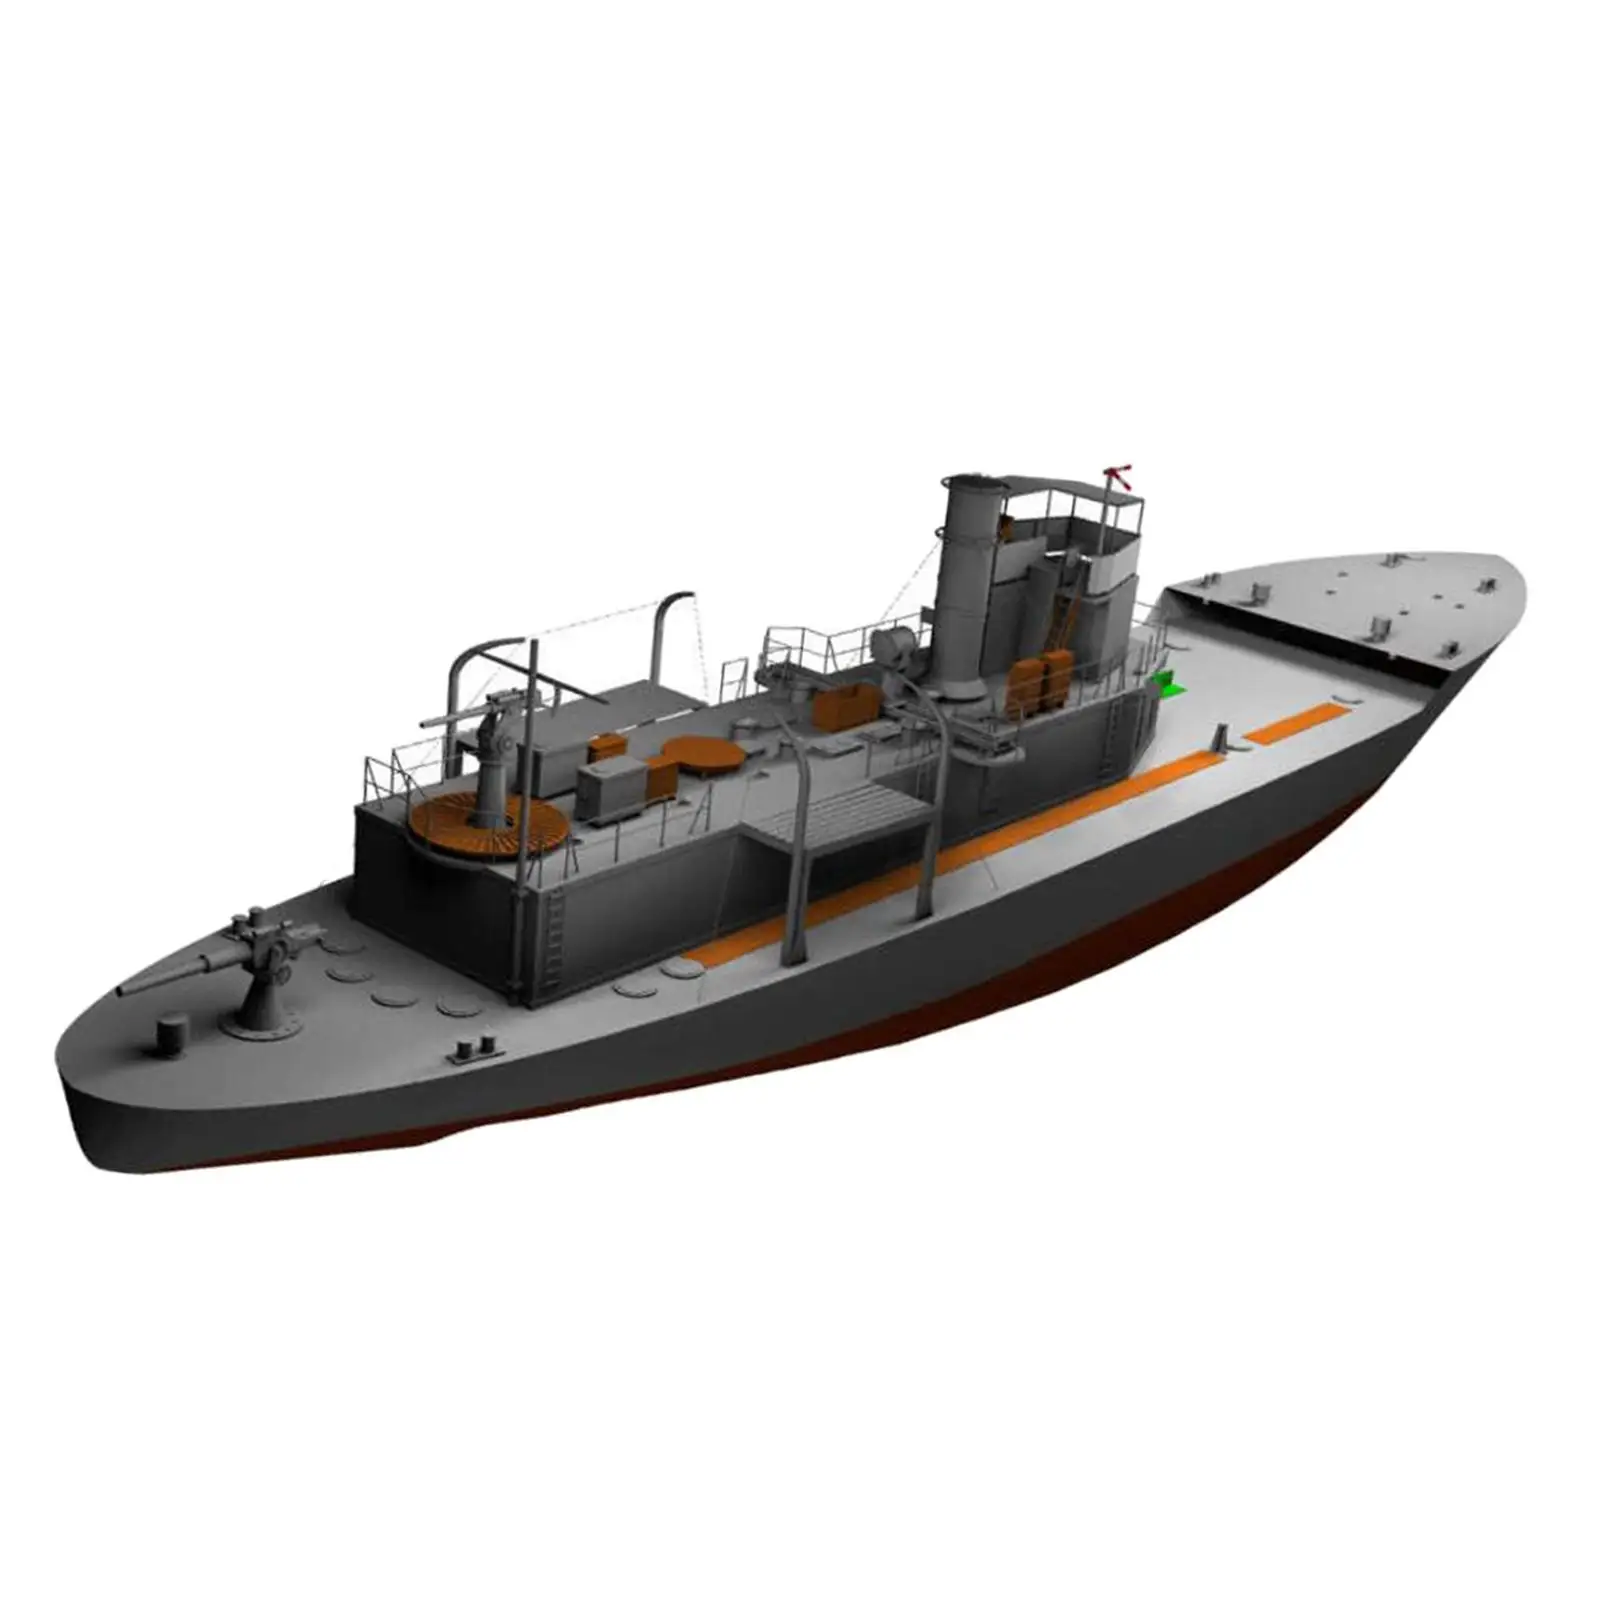 1/100 Patrol Boat Scale Model DIY Toys Papercraft for Boys Adults Children